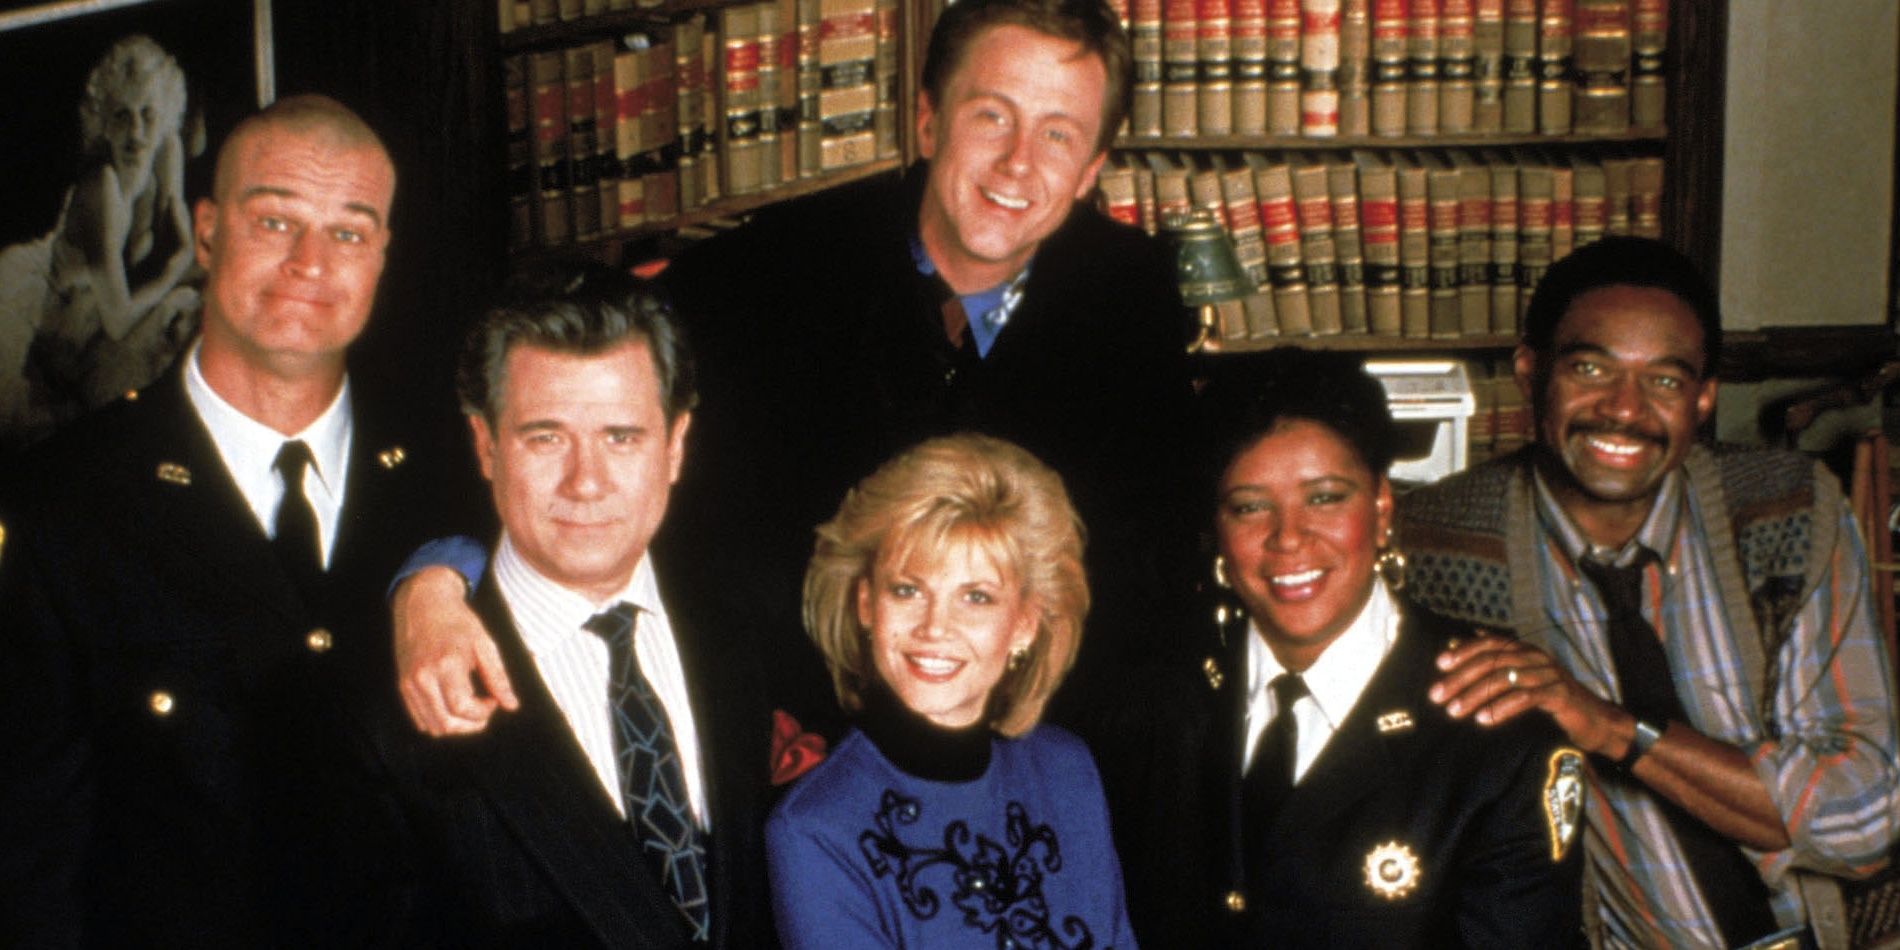 Night Court: 10 Hidden Details About The Main Characters Everyone Missed